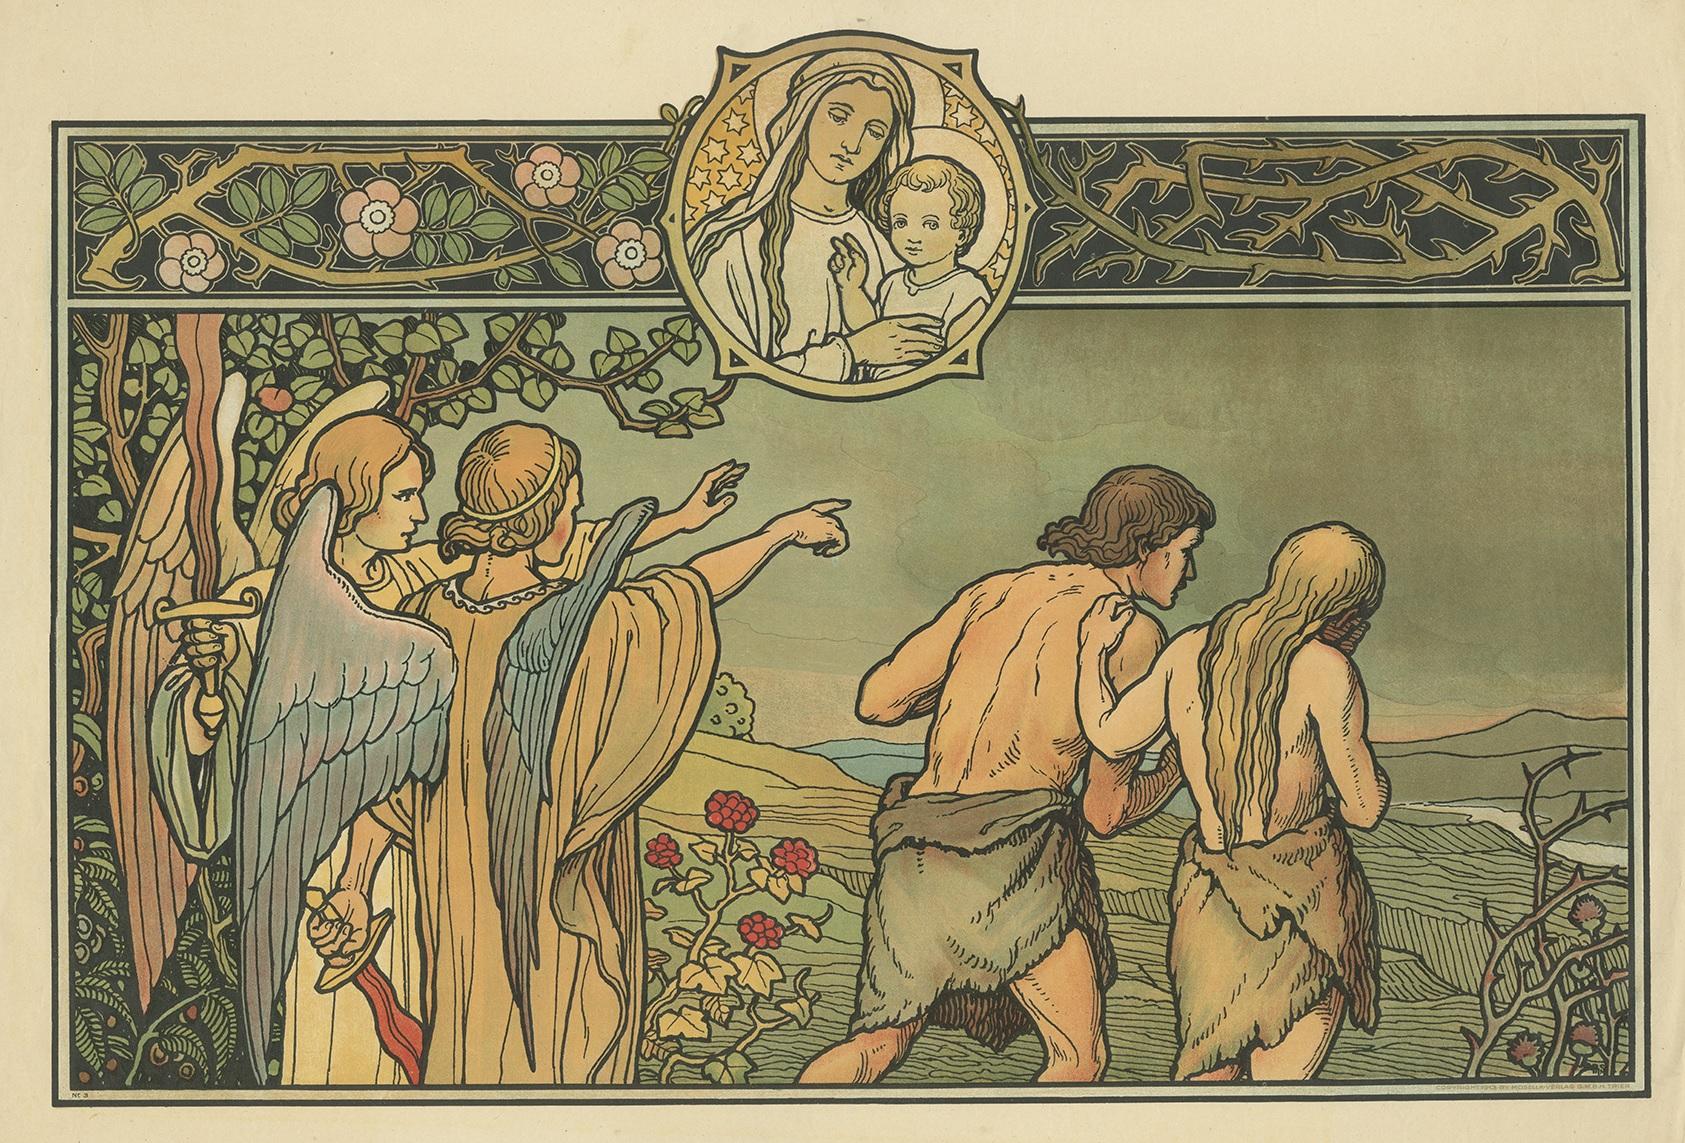 Large antique print of the Expulsion from Paradise. Published by Mosella-Verlag, 1913. This print originates from a series titled 'Kathol. Schulbibelwerk von Dr. Ecker'.